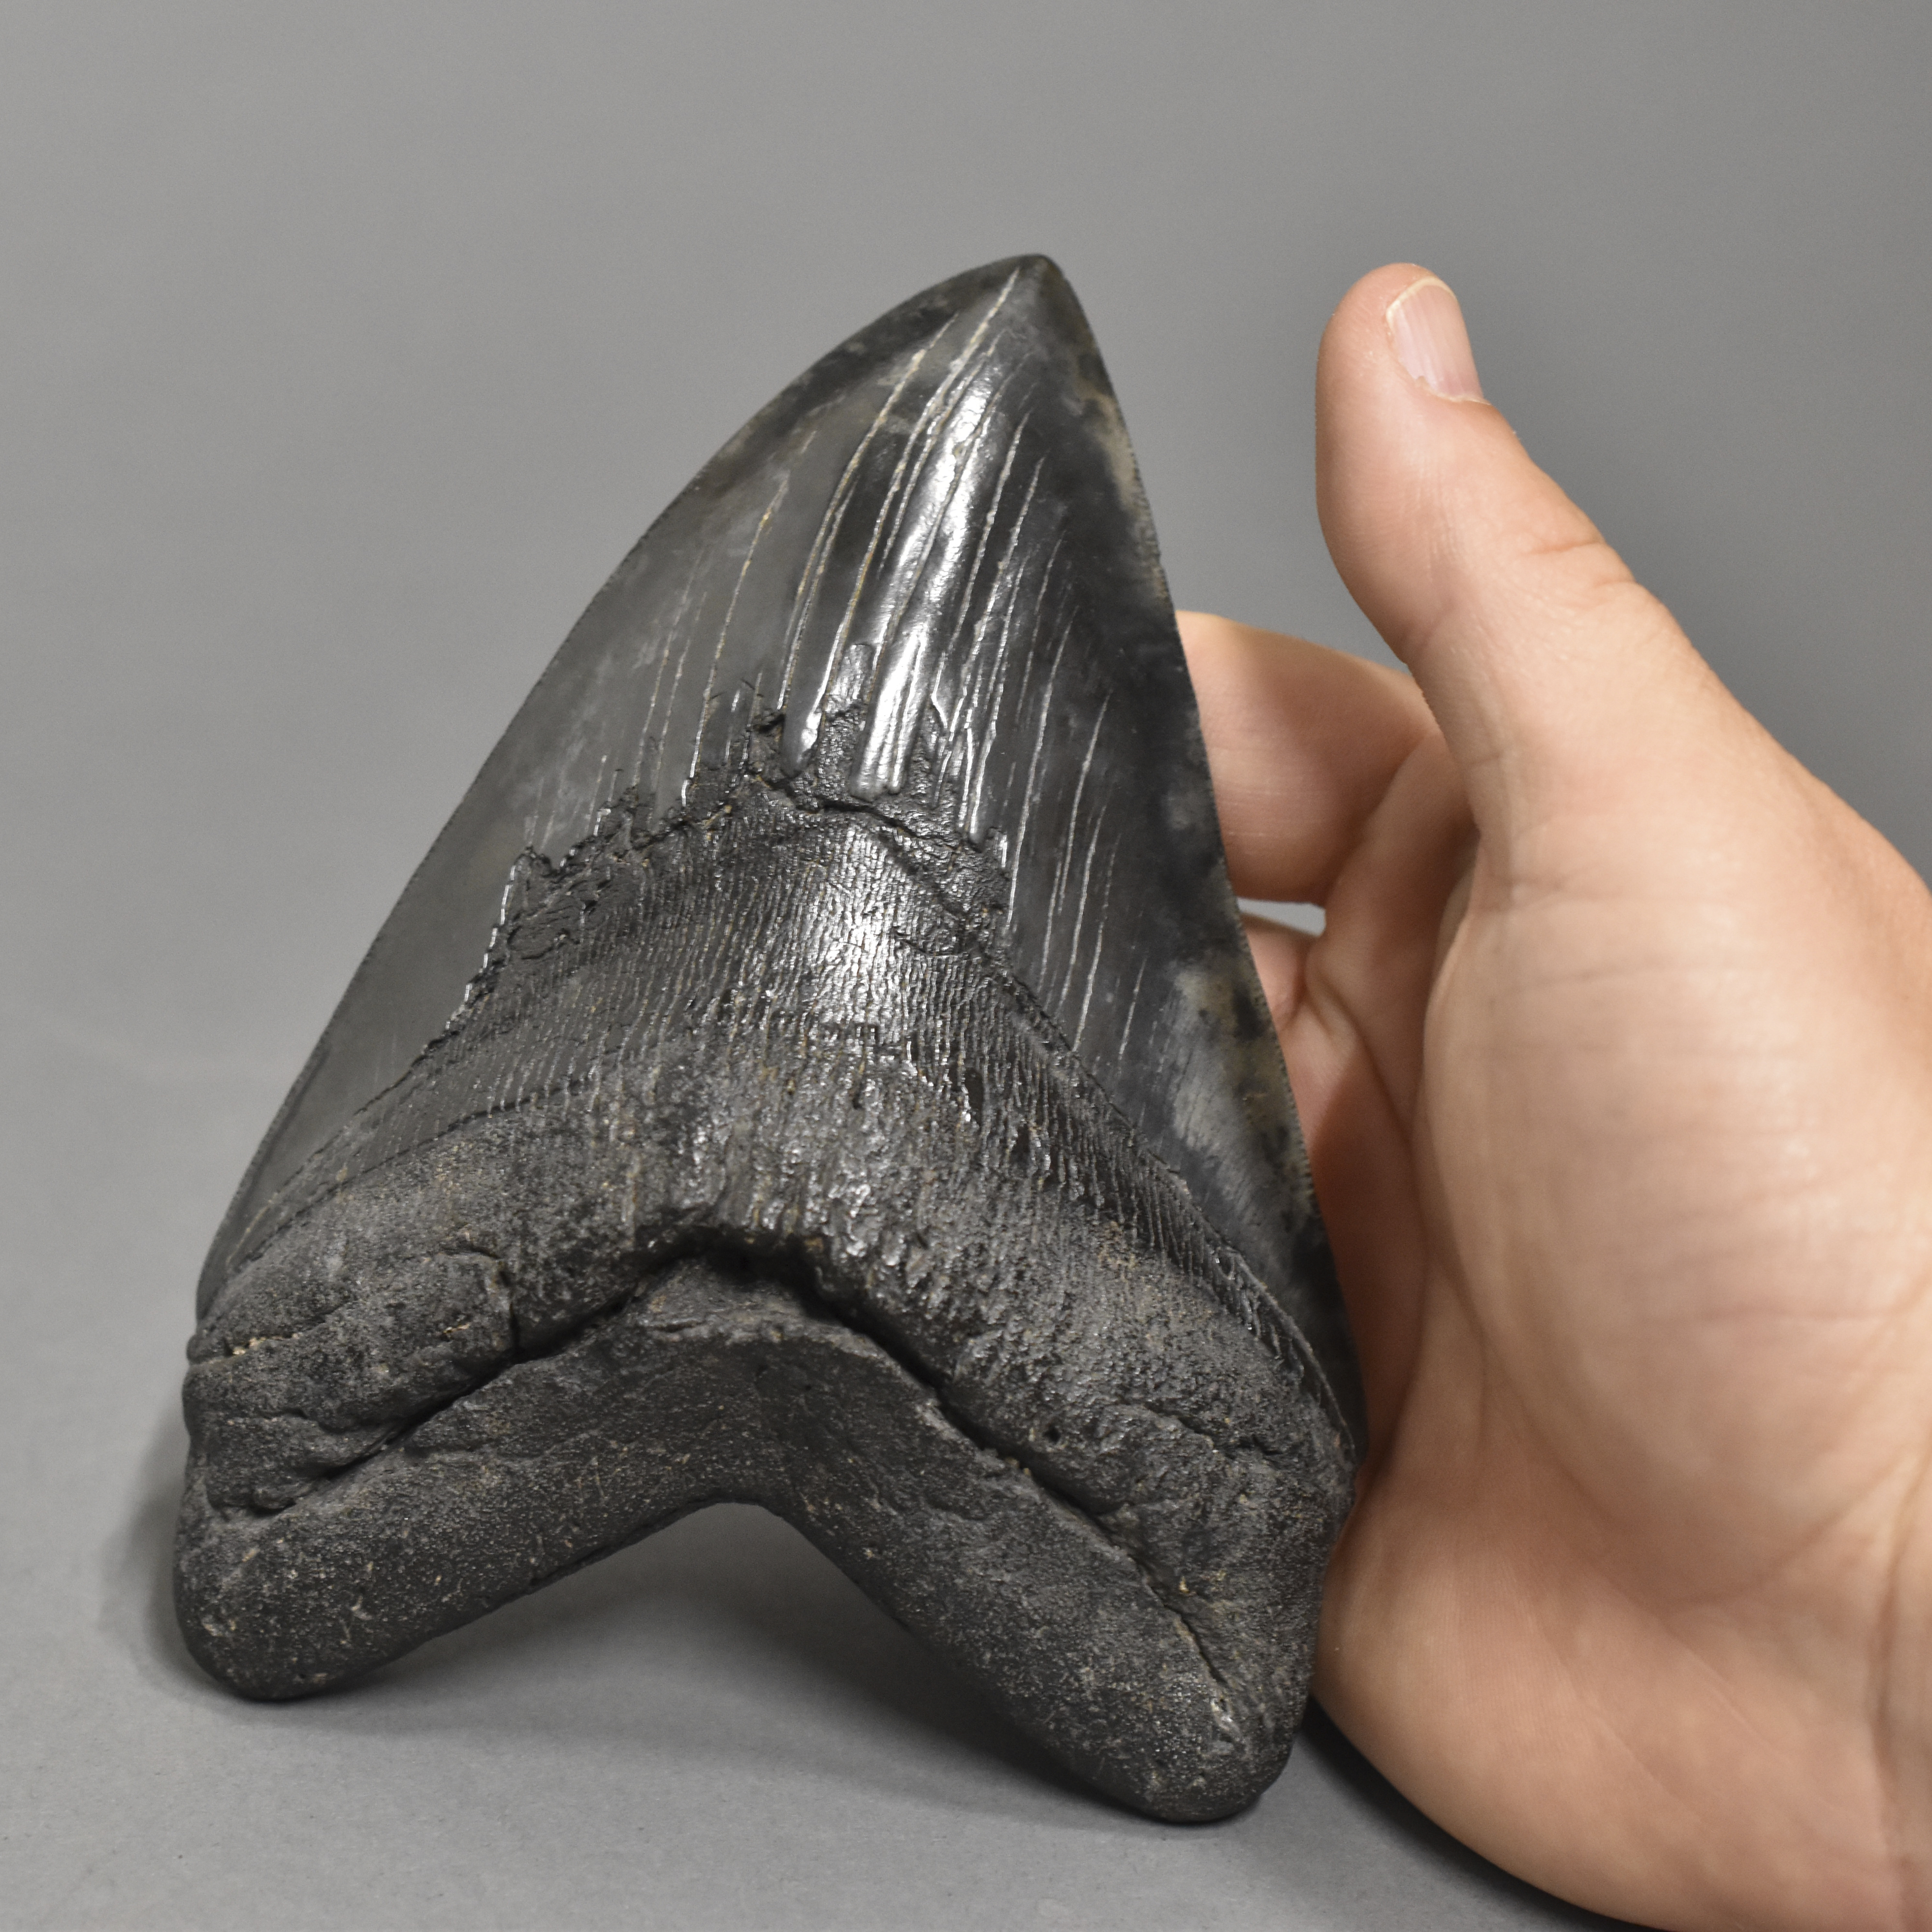 Lot 207: Black and Gray Mottled Megalodon Tooth